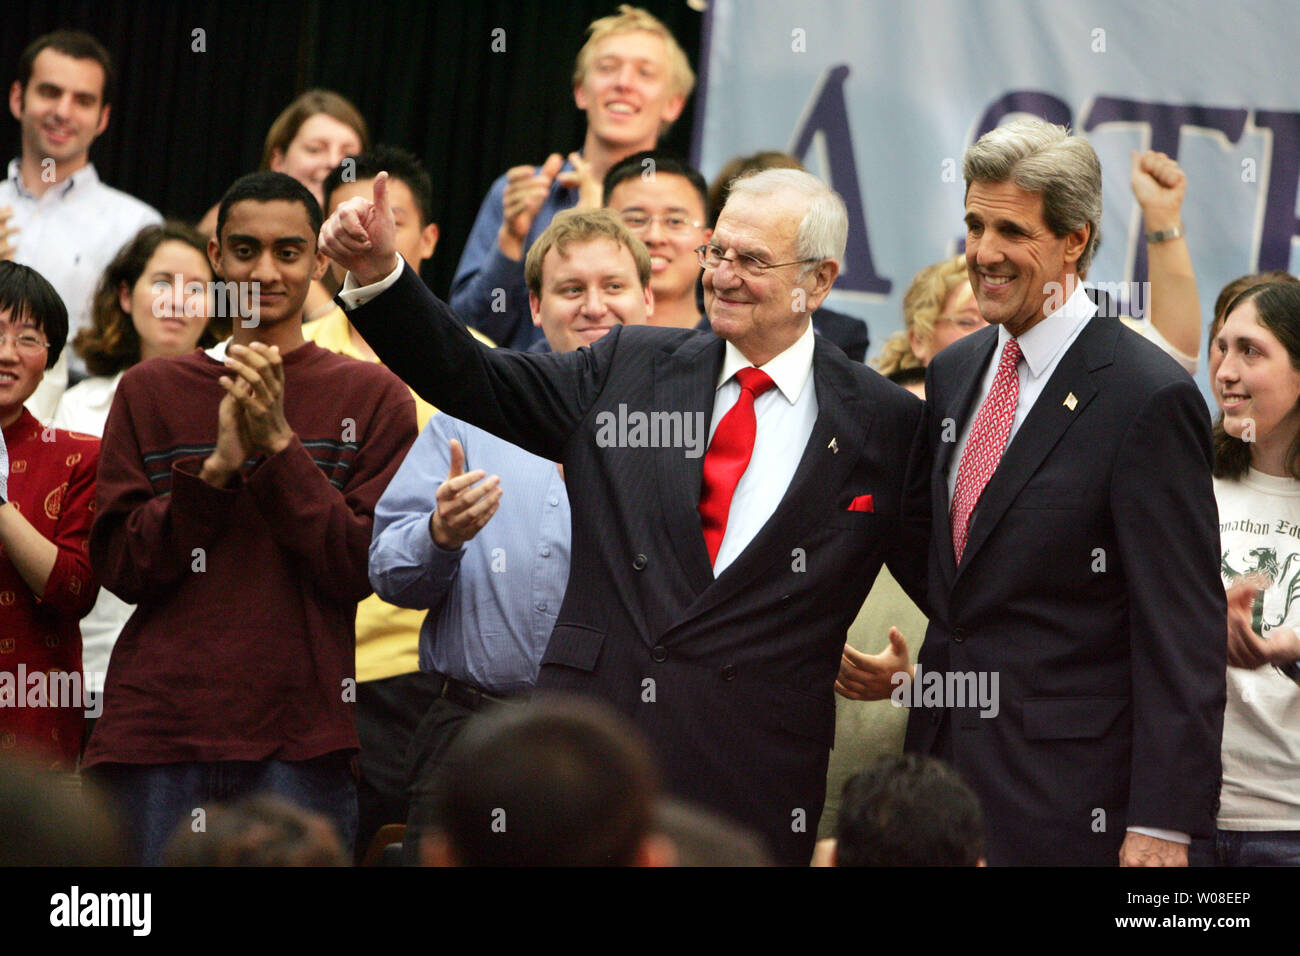 Former Chrysler Motors Chairman Lee Iacocca (L) waves to the crowd as he enters a campaign rally with Democratic presidential candidate, U.S. Senator John Kerry at San Jose State University in San Jose, CA on June 24, 2004.   (UPI Photo/Terry Schmitt) Stock Photo